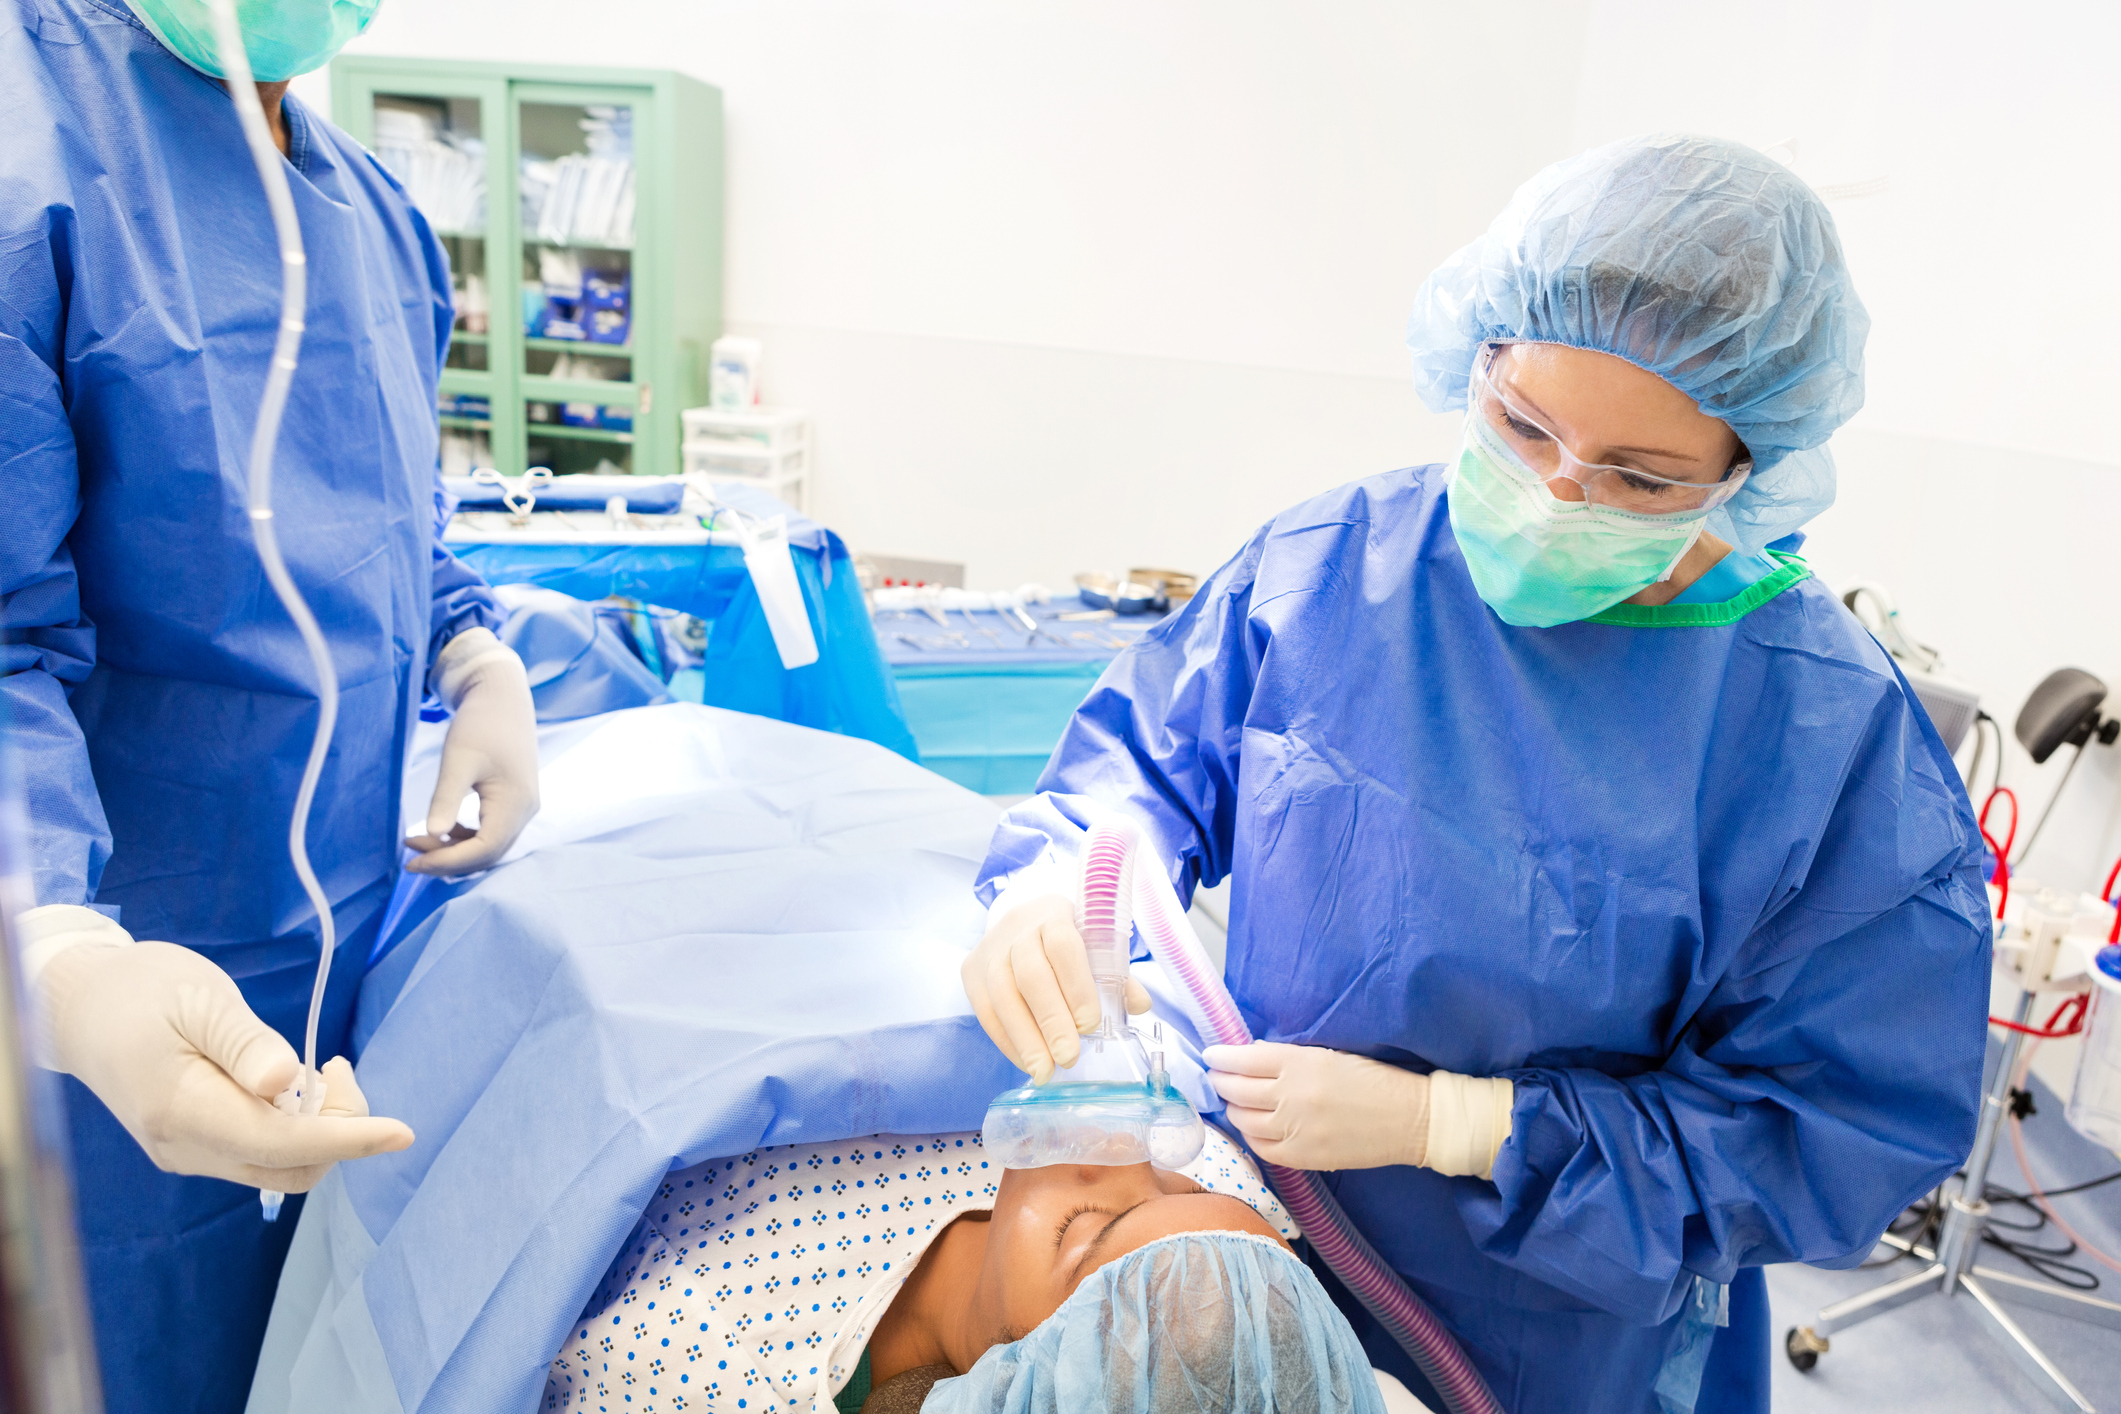 Medical professional sedating a patient before surgery